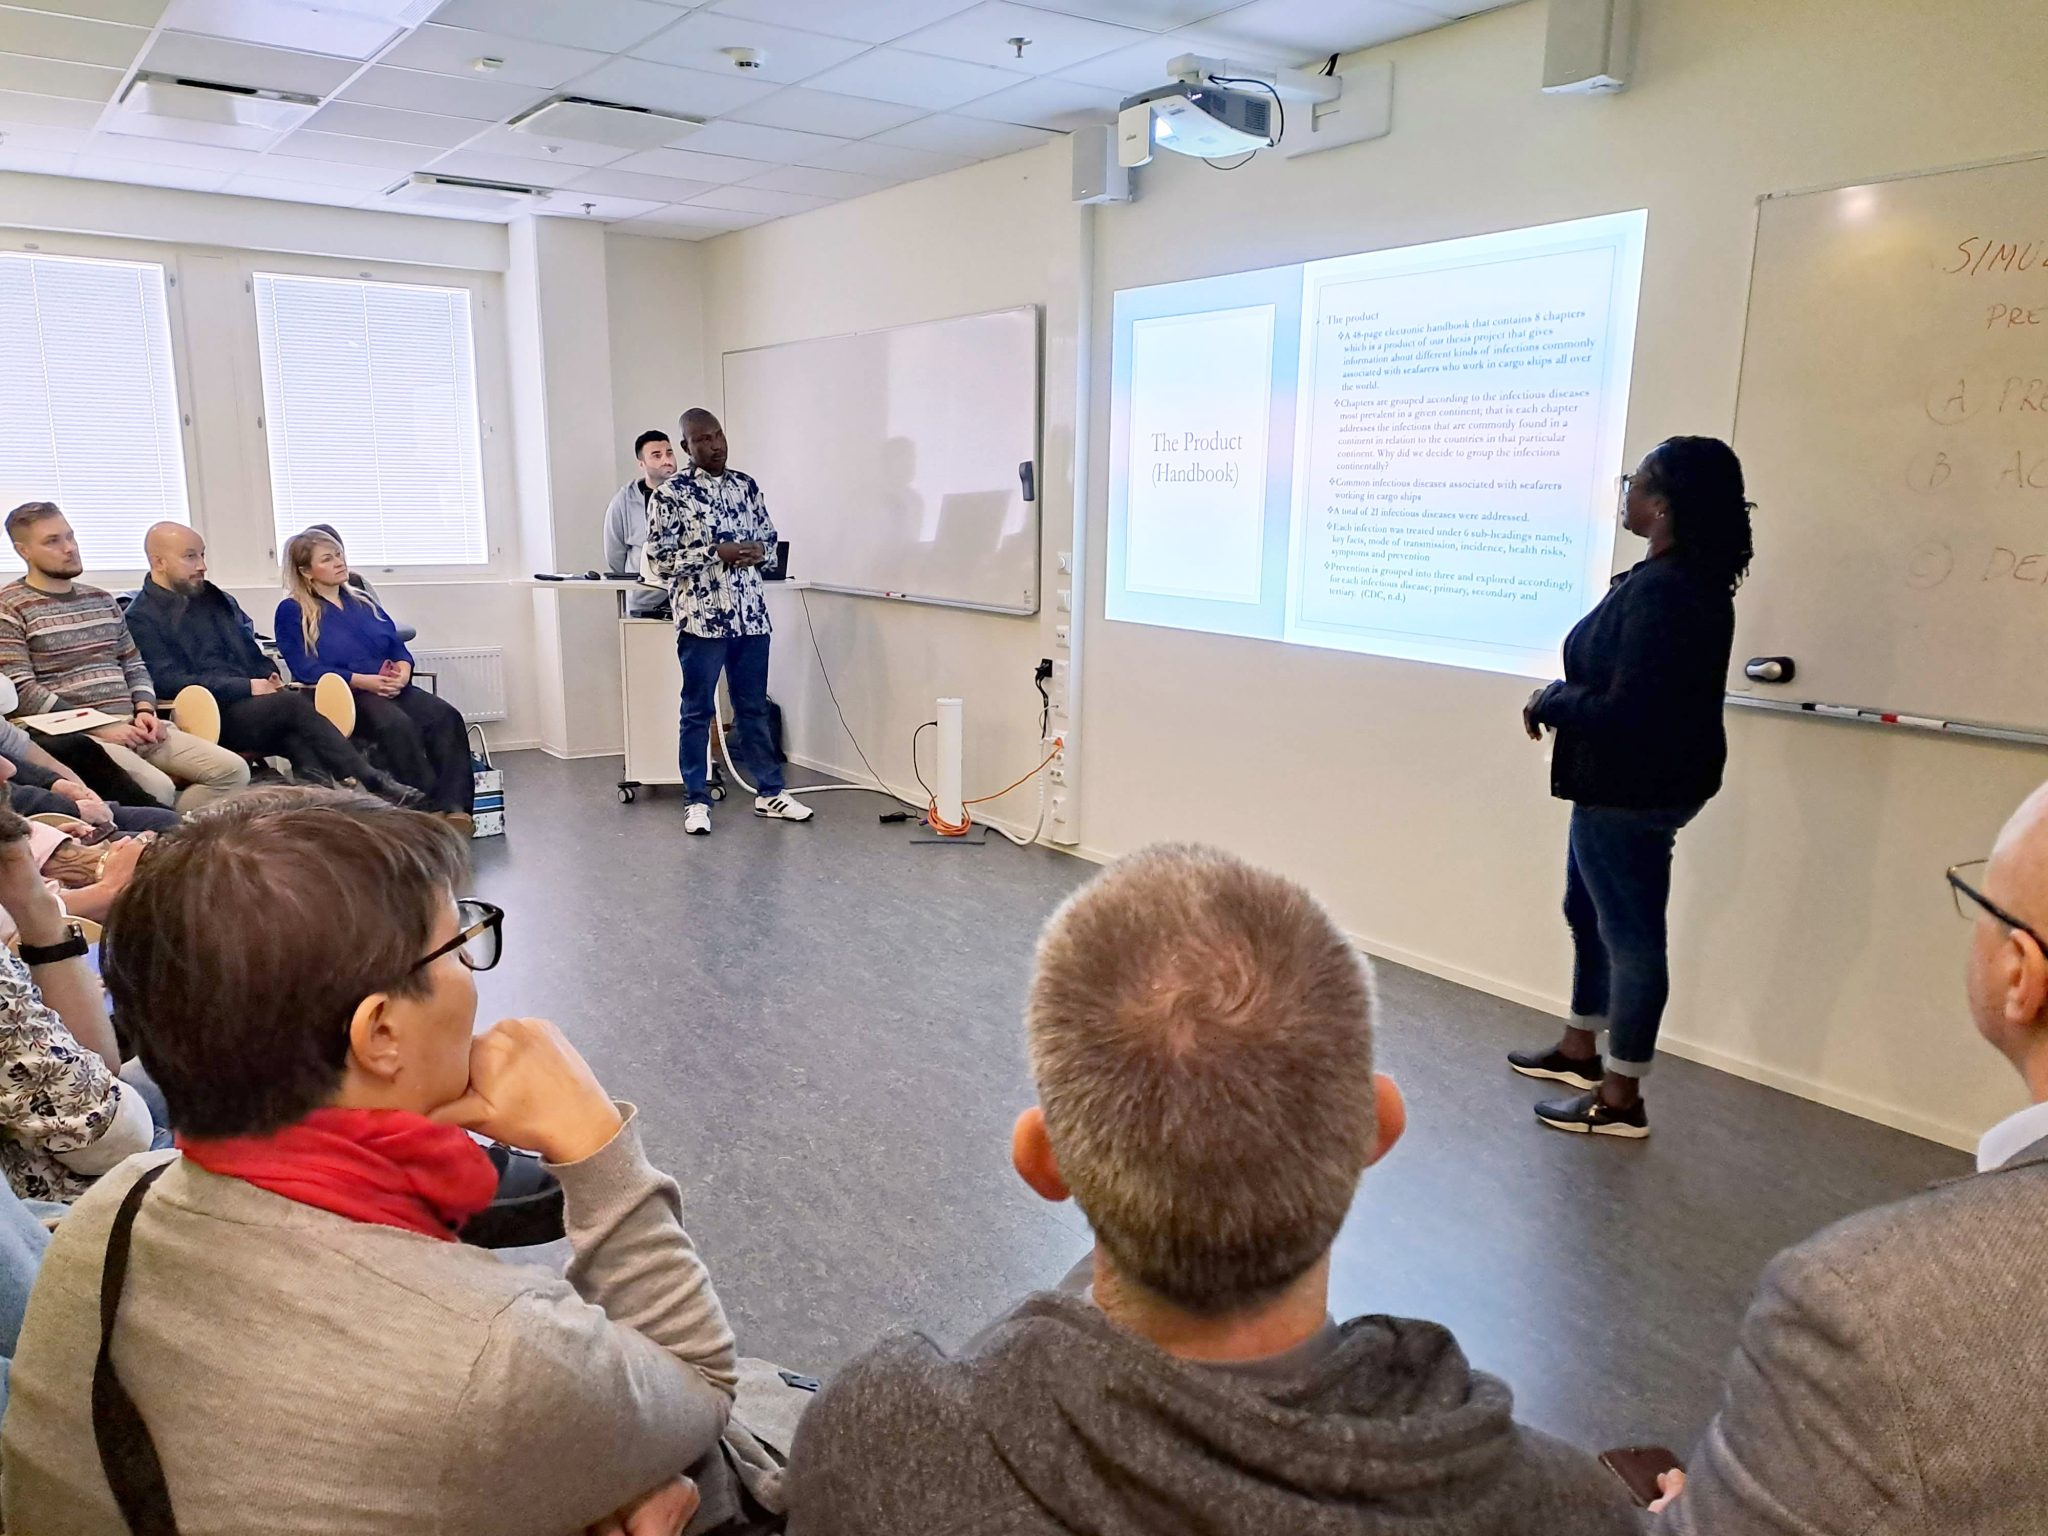 Ünal Selim (left), Ajayi Adeniyi, and Janet Anomwa Pitkänen stand in front of the class with a PowerPoint presentation in the background. The audience is sitting in chairs, listening.